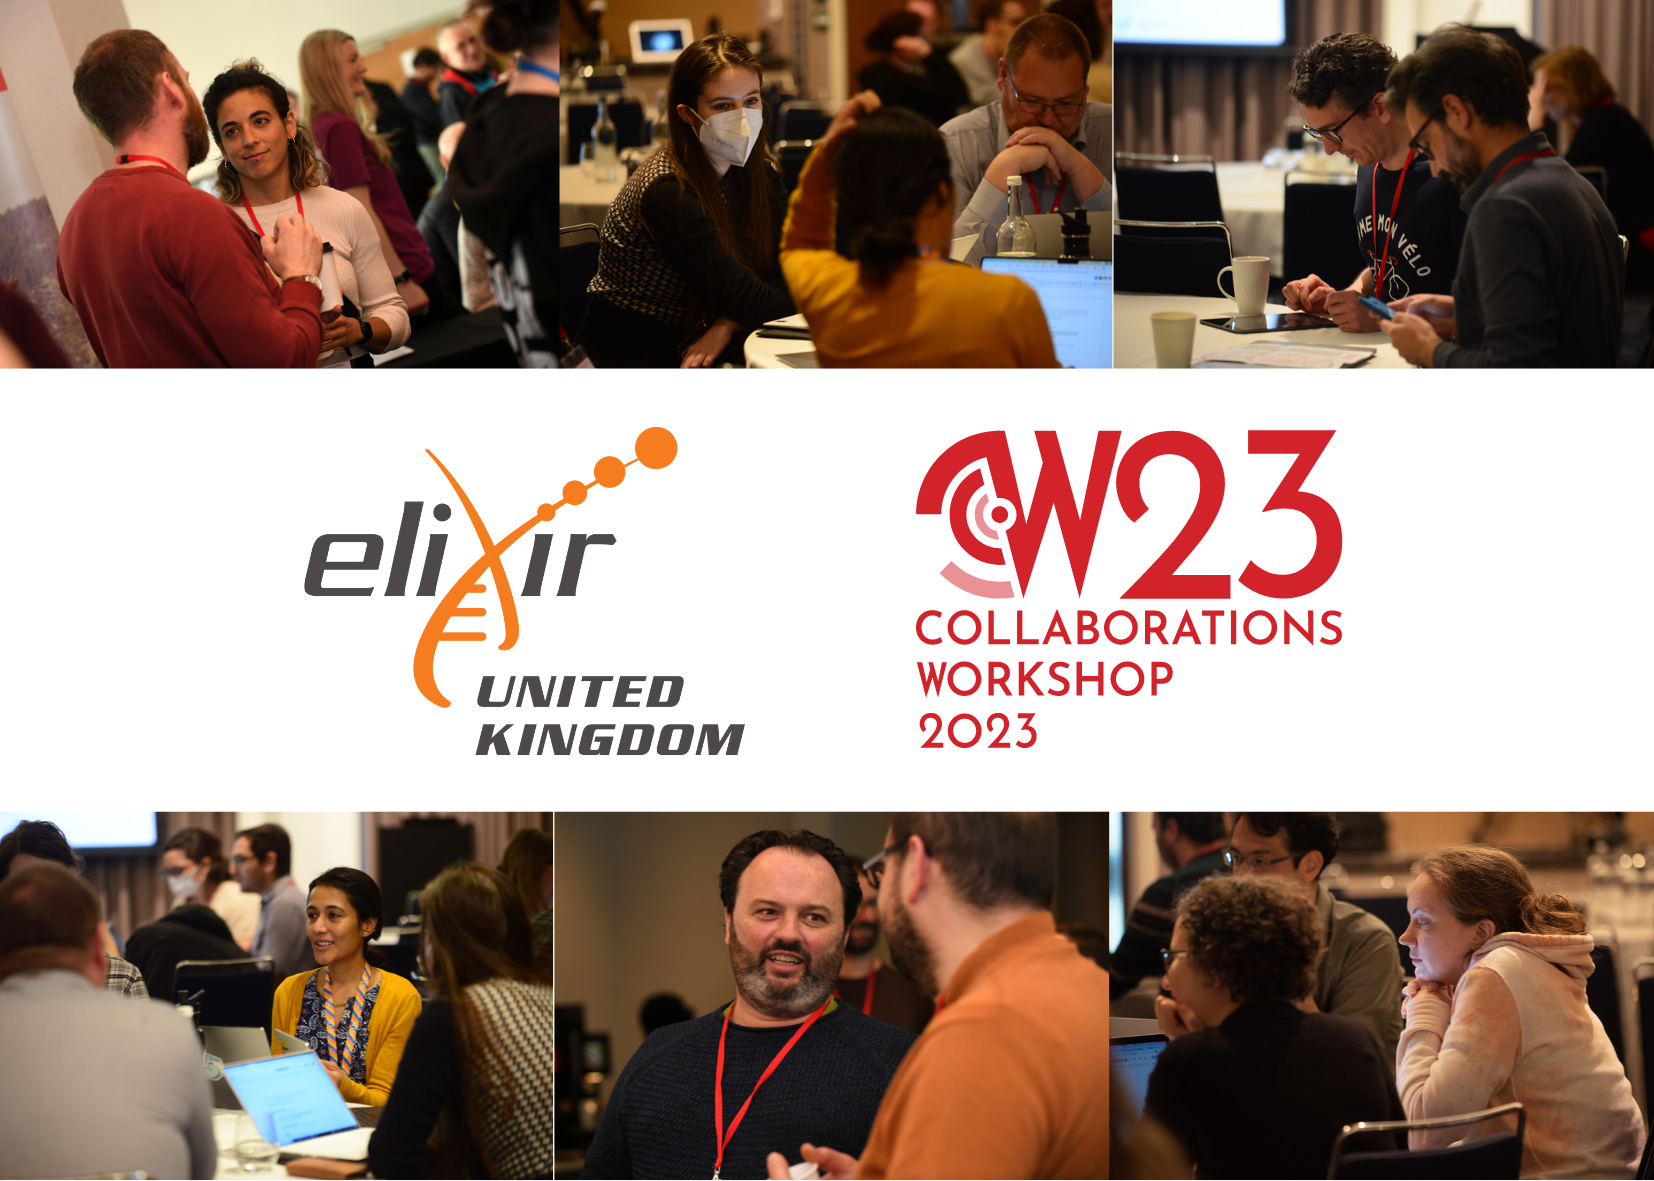 ELIXIR-UK and CW23 logos surrounded by pictures from the conference